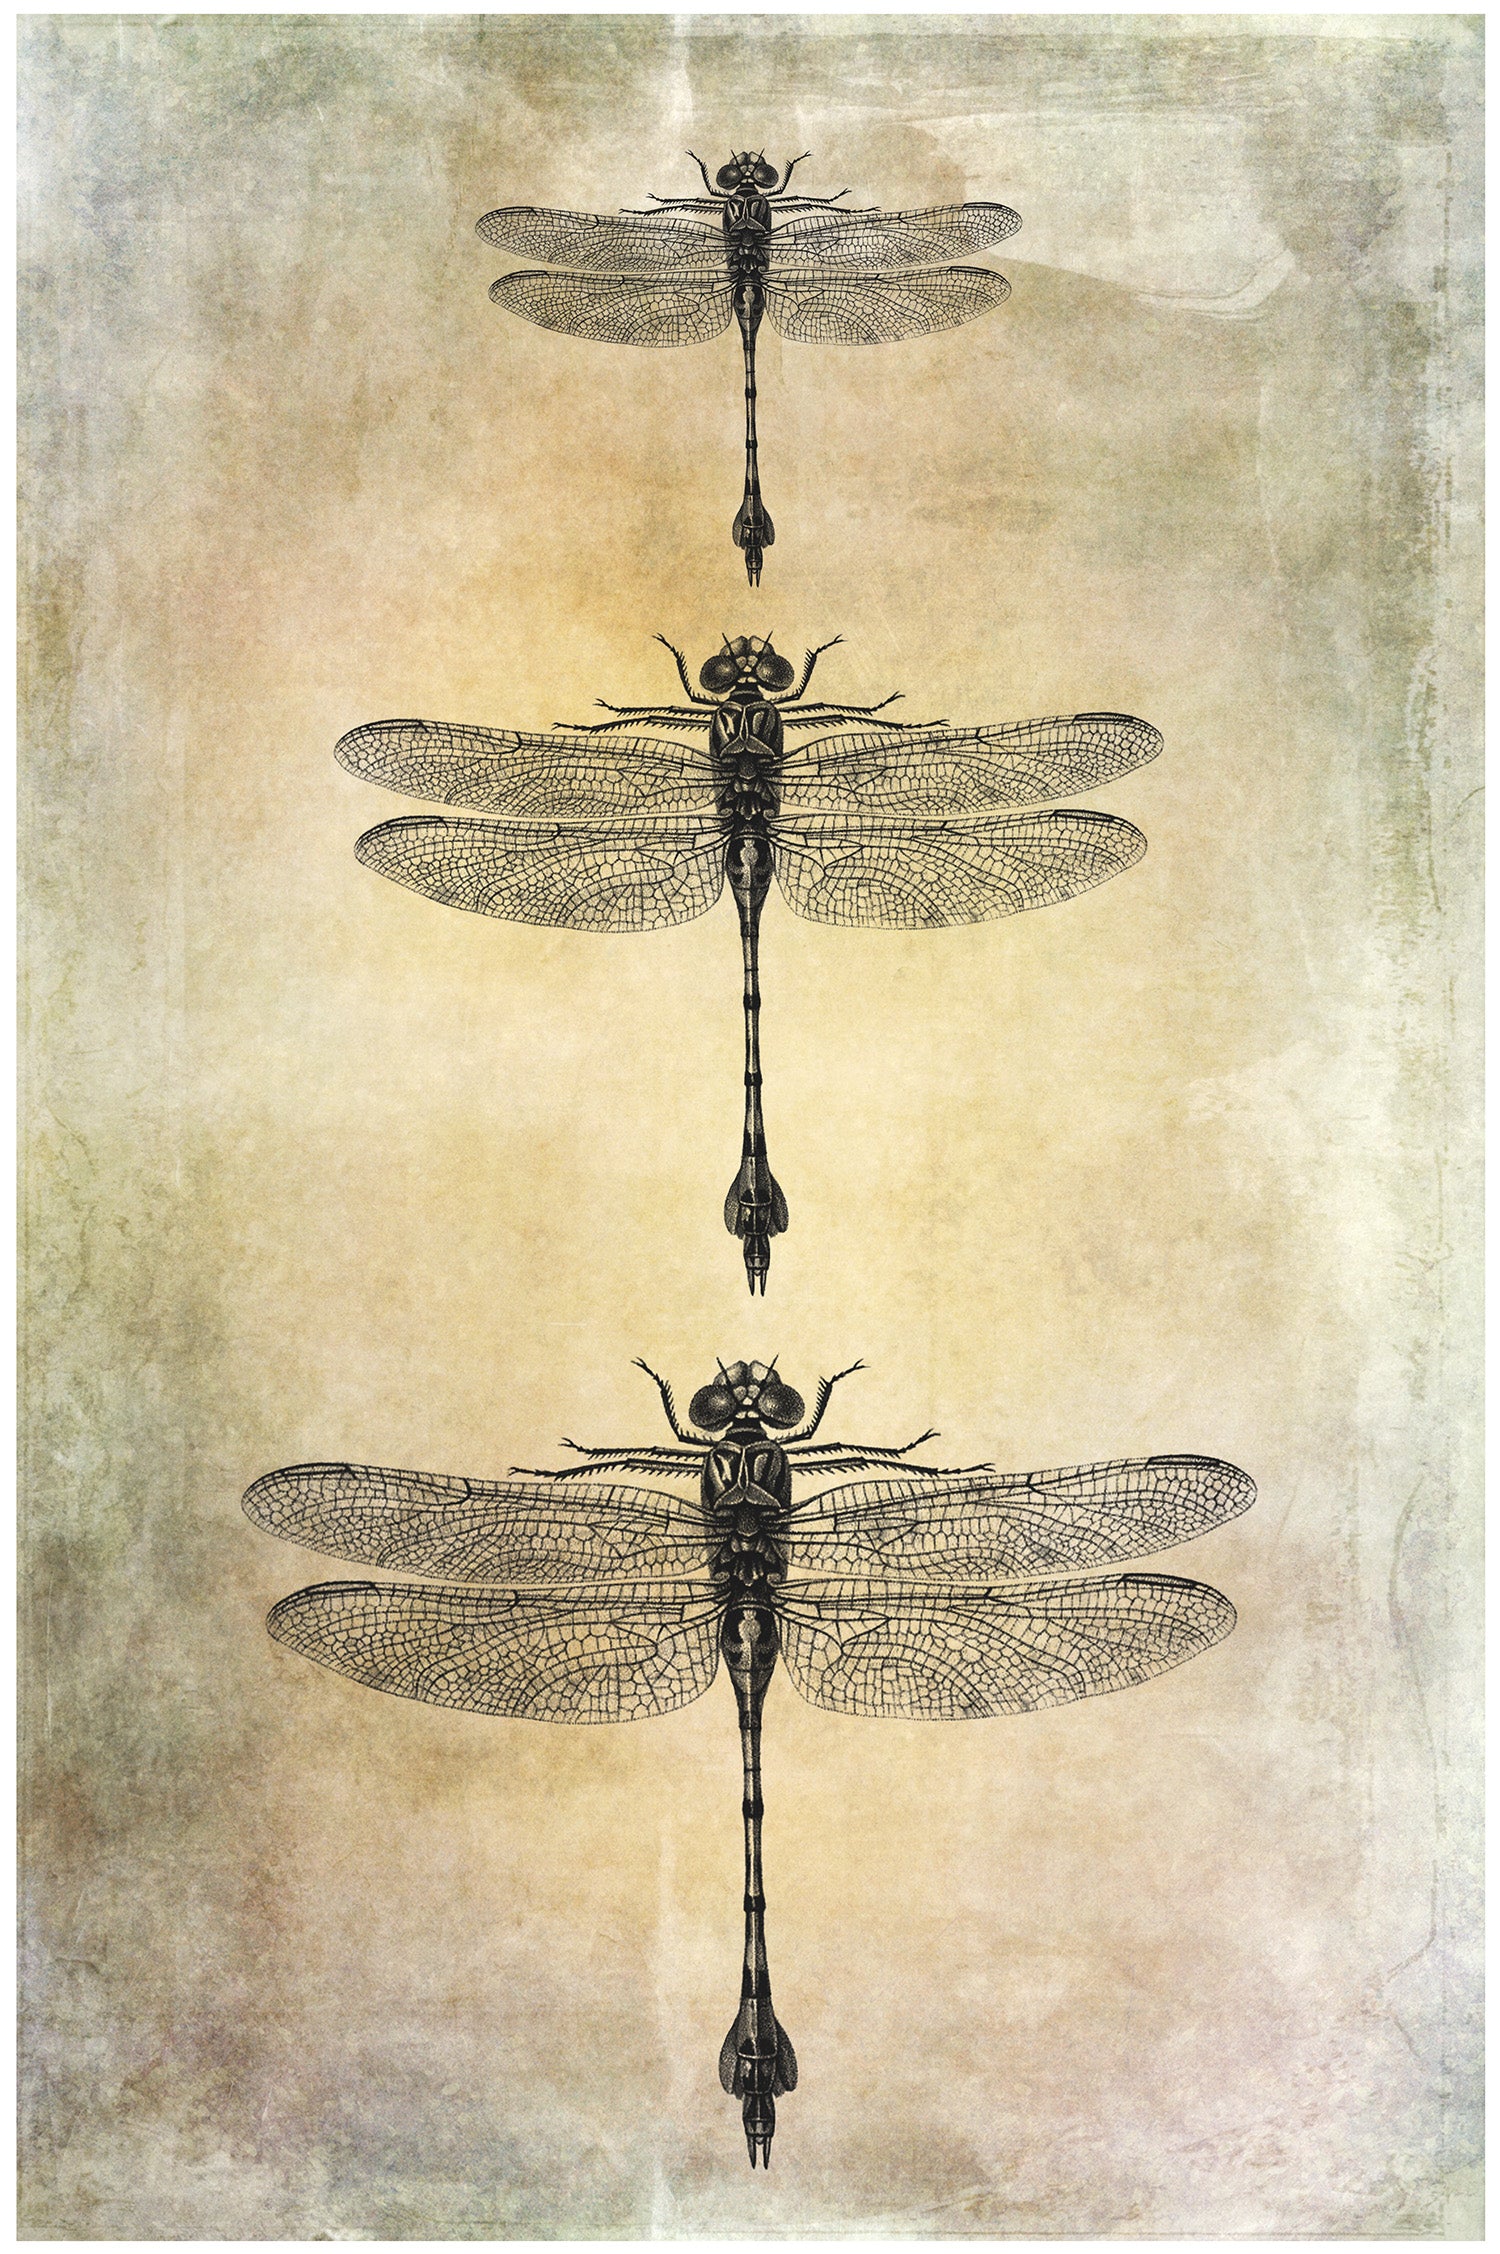 25 Beautiful Dragonfly & Damselfly photoshop Brushes. High resolution and perfect for printing without any loss in quality. ATP Textures.